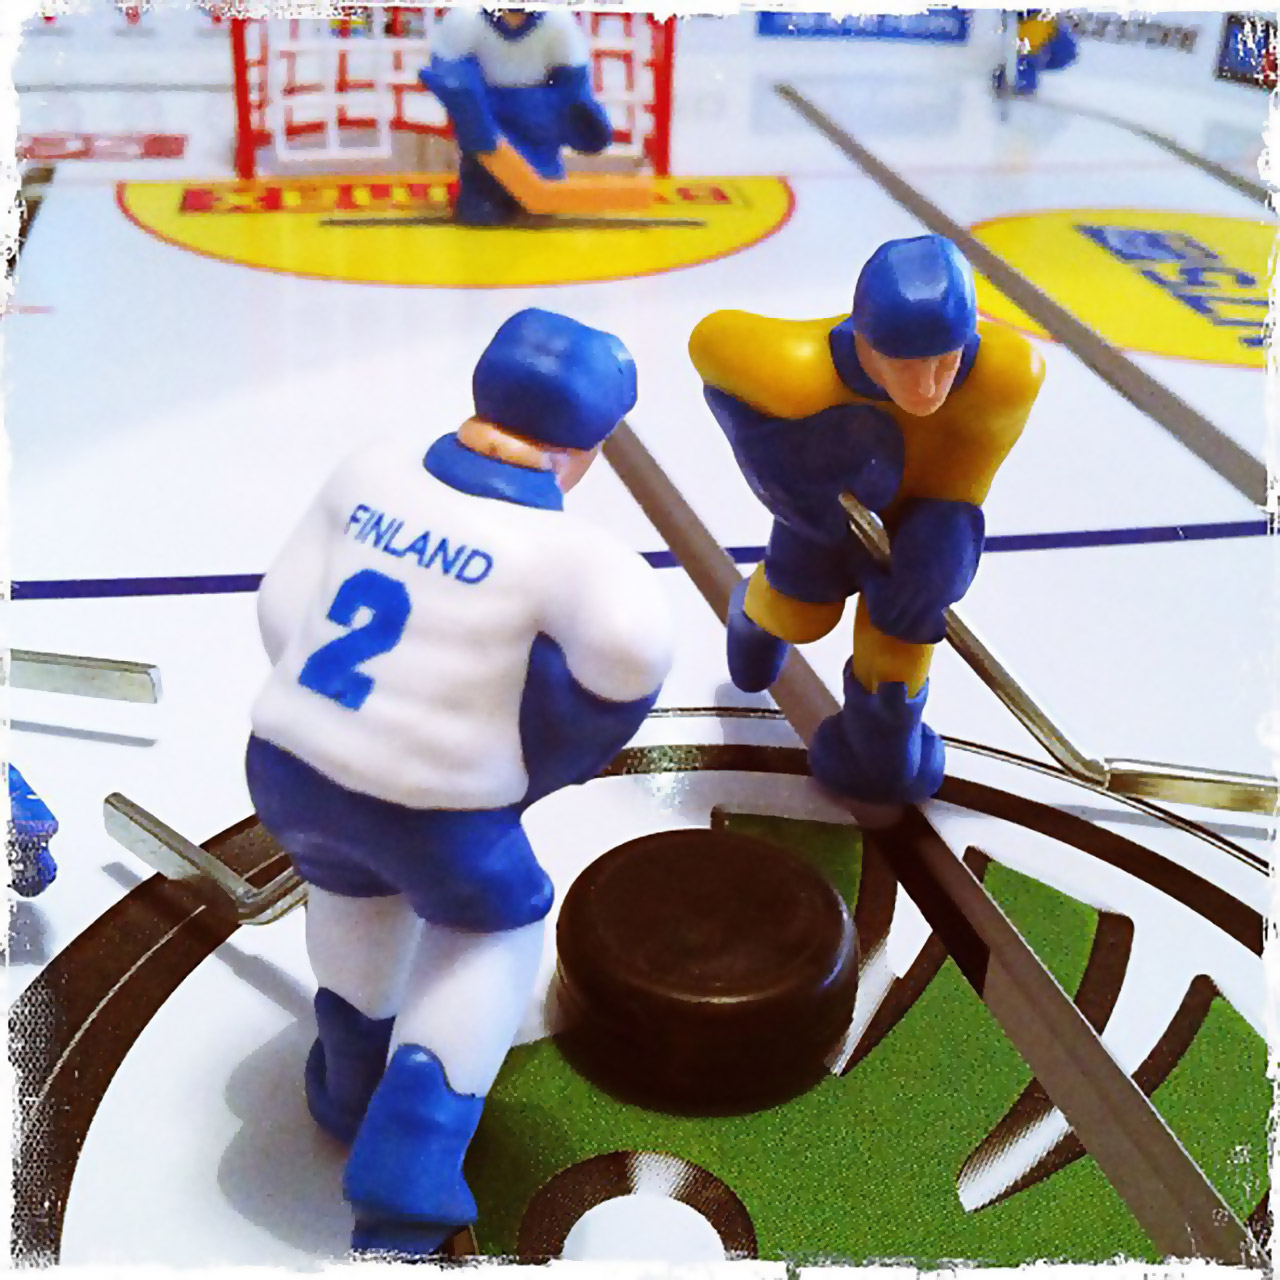 Rod Hockey Game Lets You Host Your Own Tabletop Winter Olympics